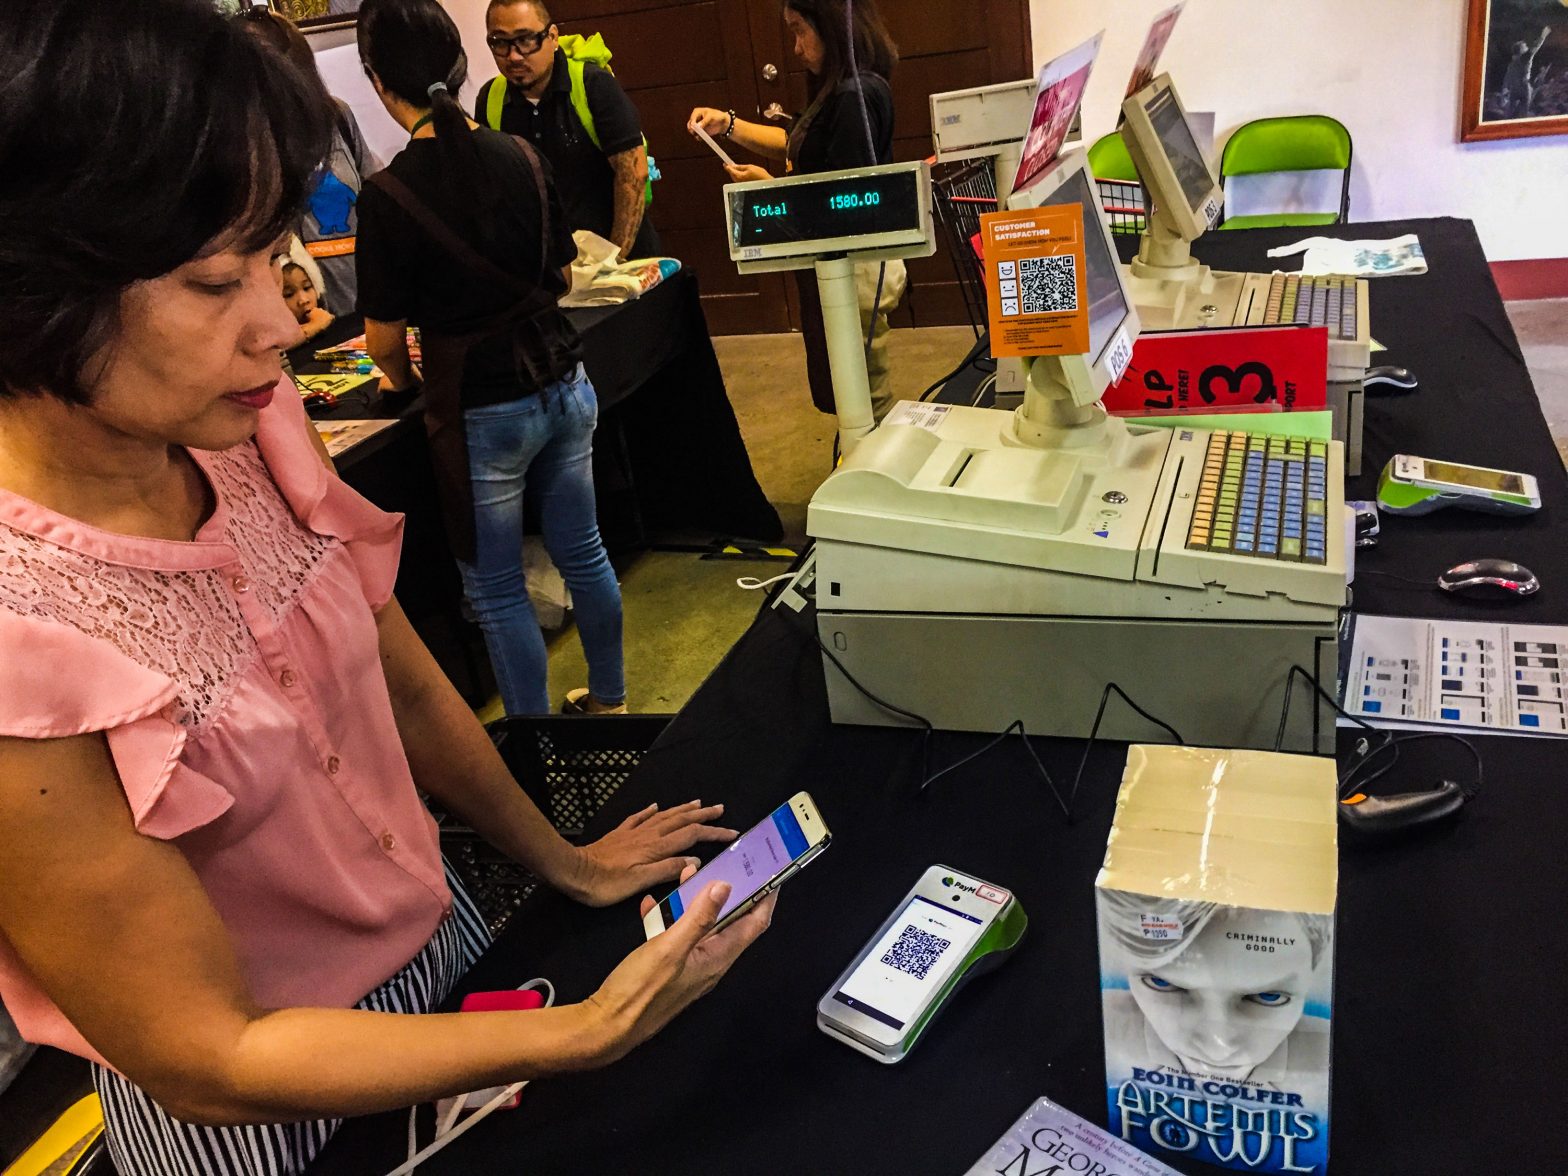 PayMaya brings cashless payment options, more perks to Big Bad Wolf Book Sale in Cebu